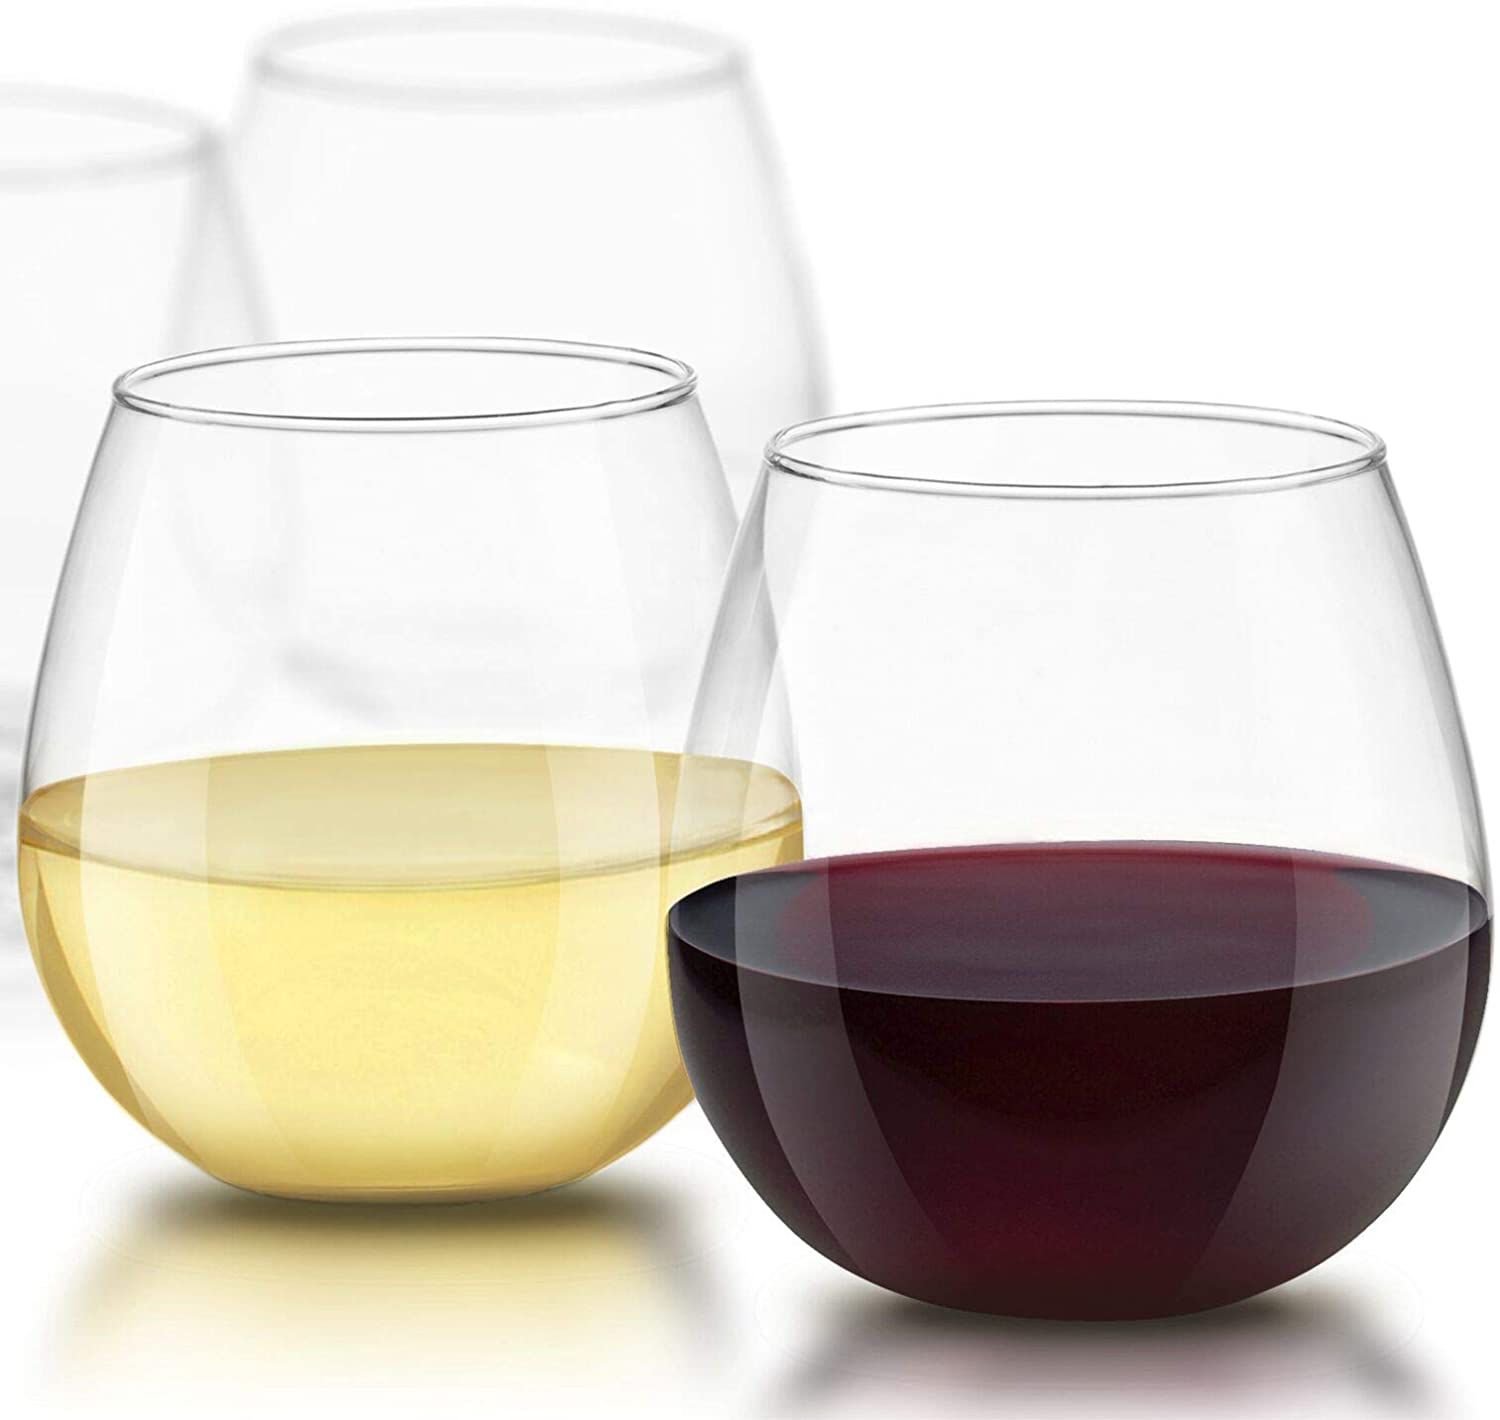 Stemless wine glasses with red and white wine